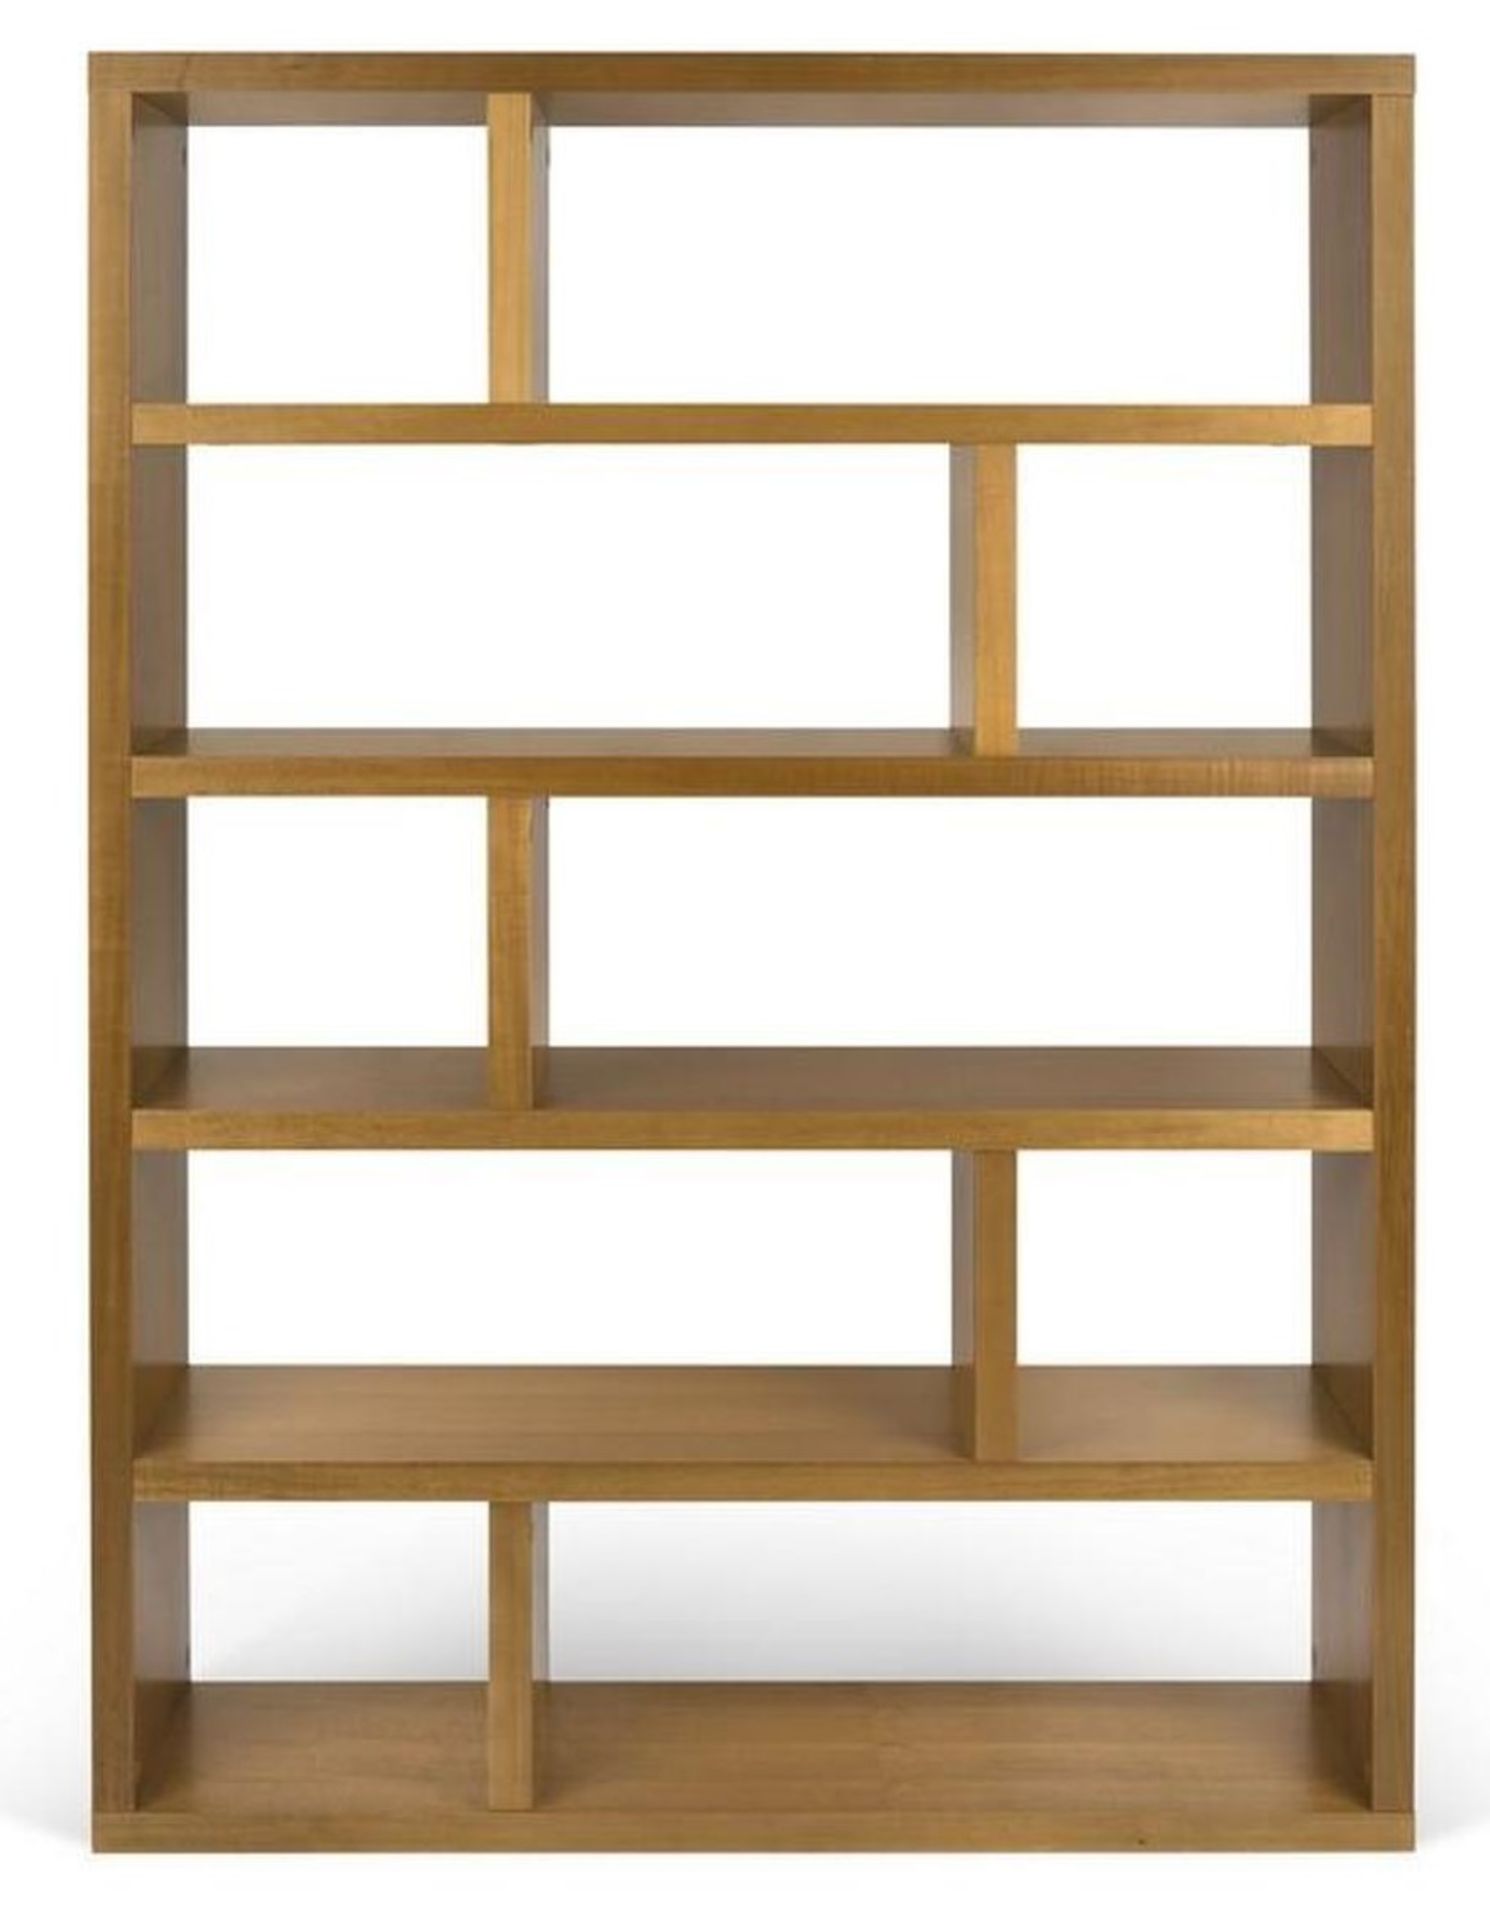 1 x Comtemporary High Shelving Unit - Mukali - Dimensions: 47W x 11D x 68H Inches - New Boxed Stock - Image 2 of 3